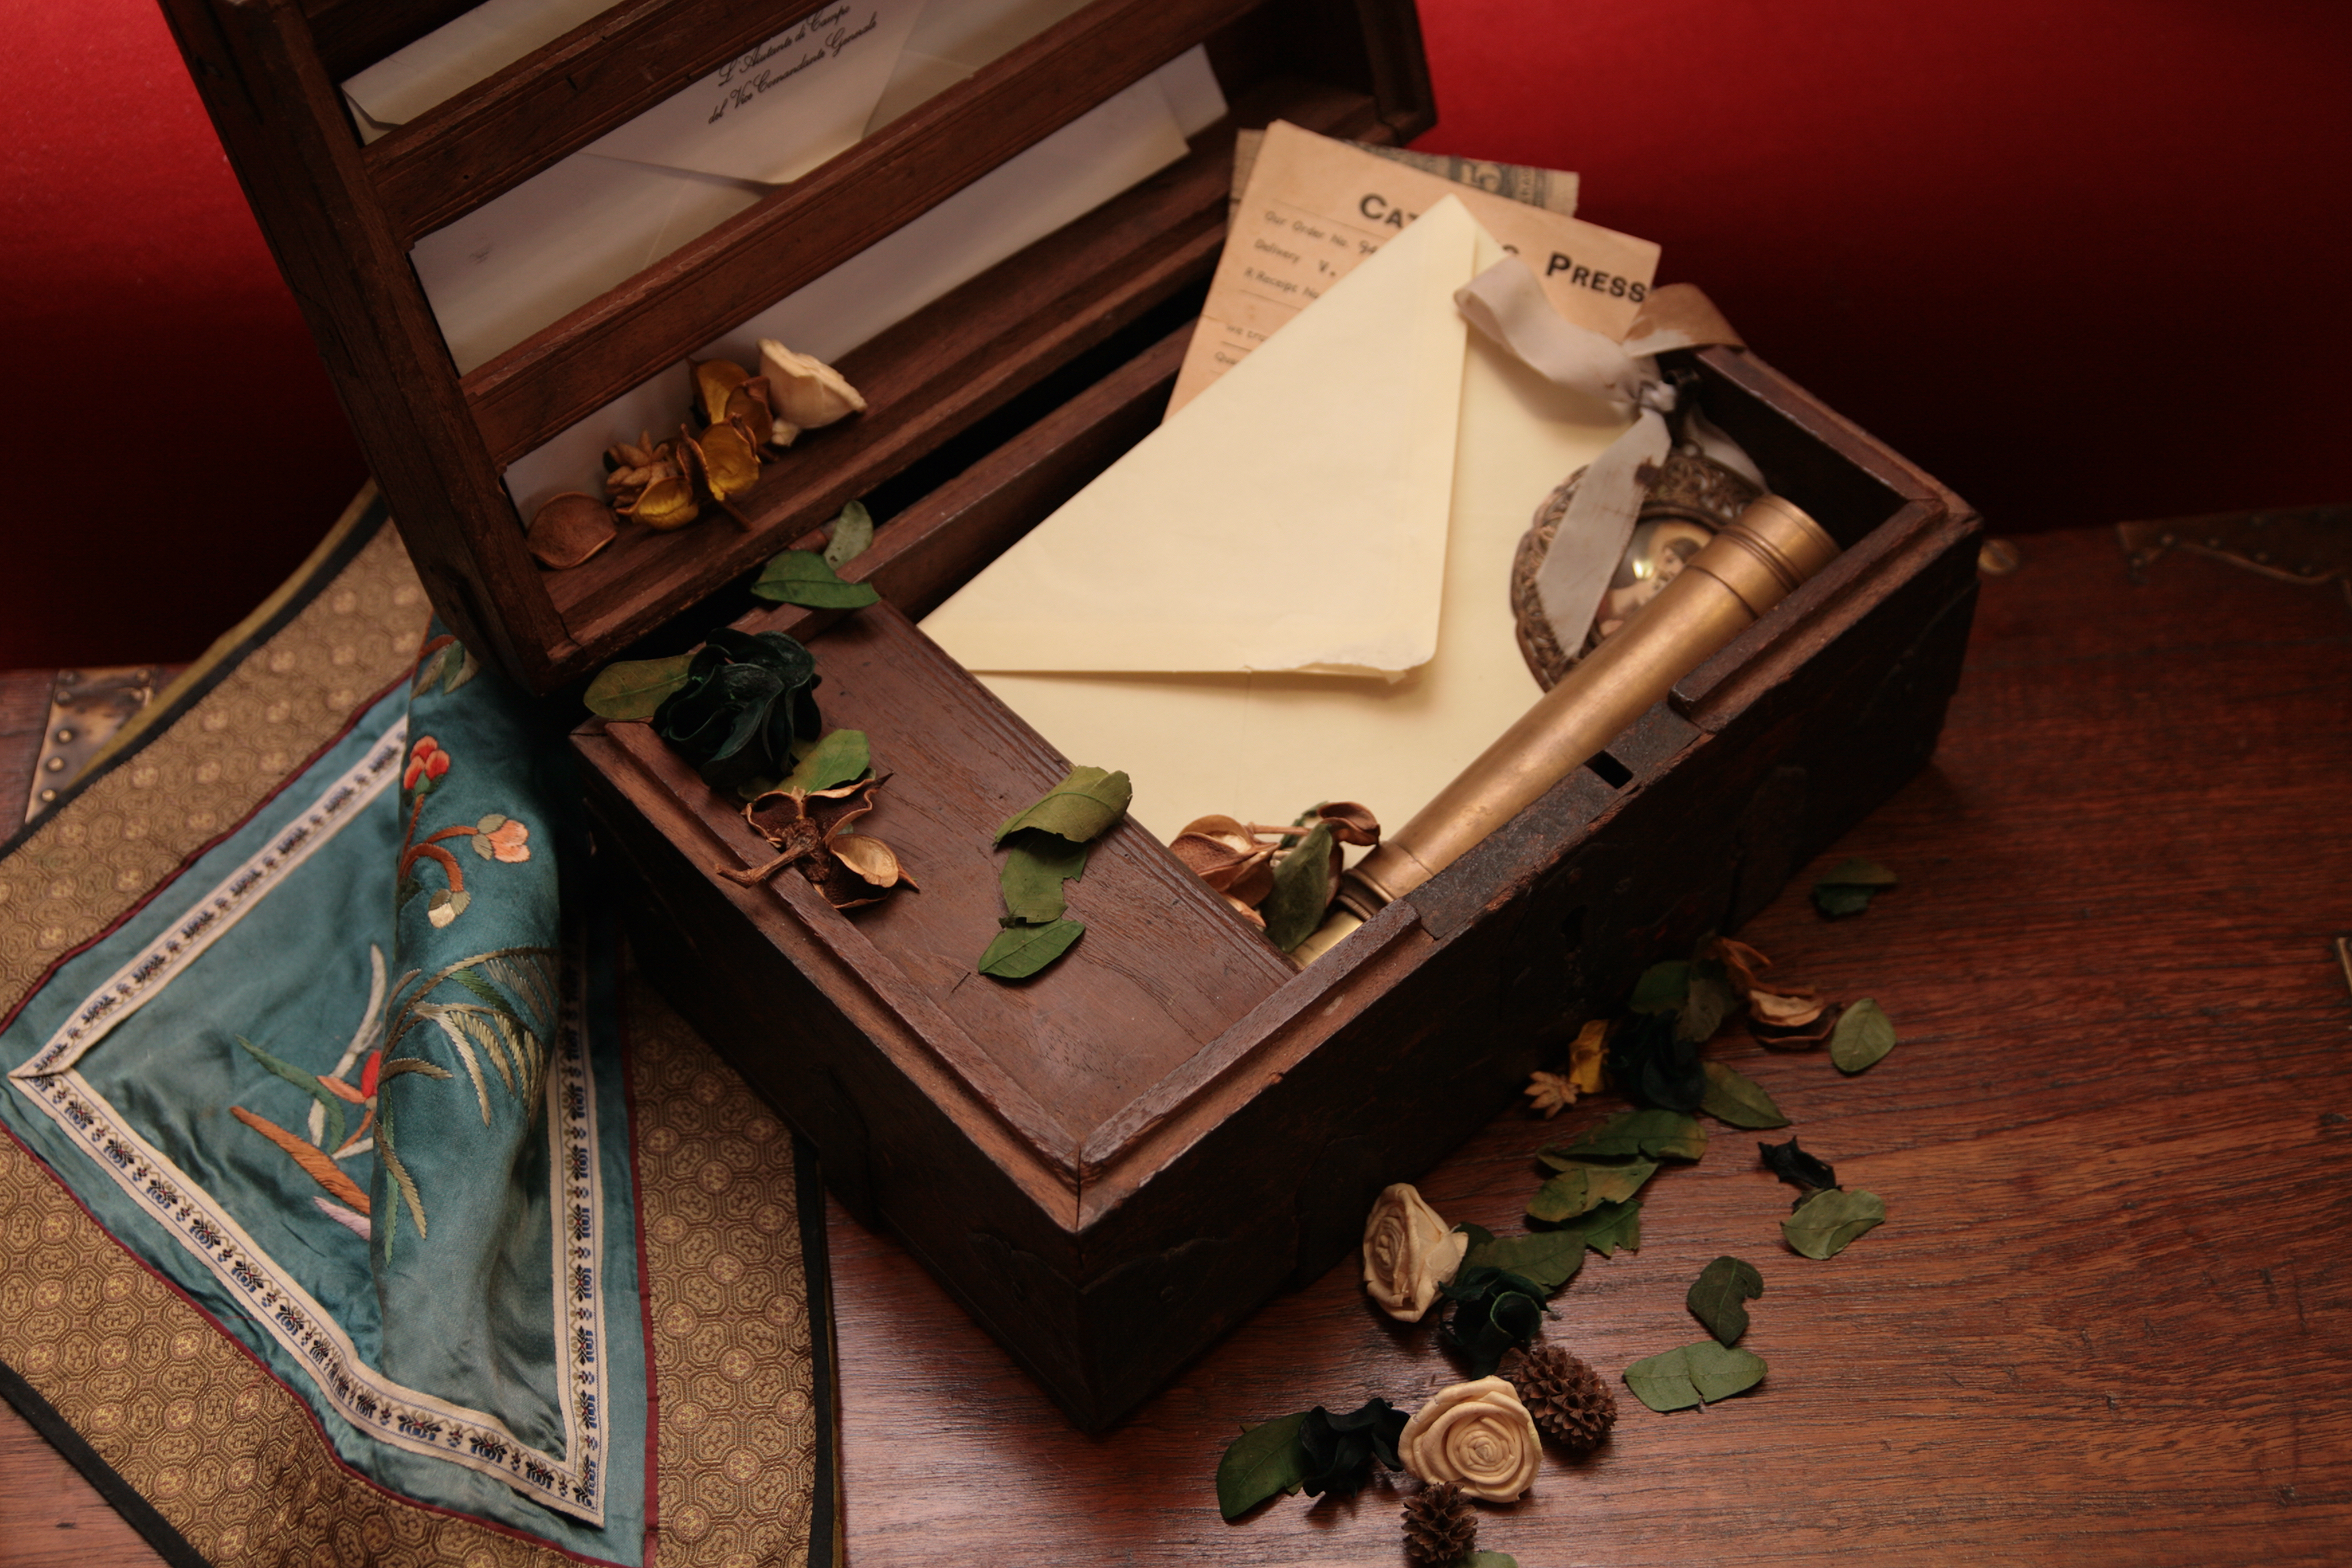 3 Ways Locksmiths Can Make Antique Boxes and Trunks Functional